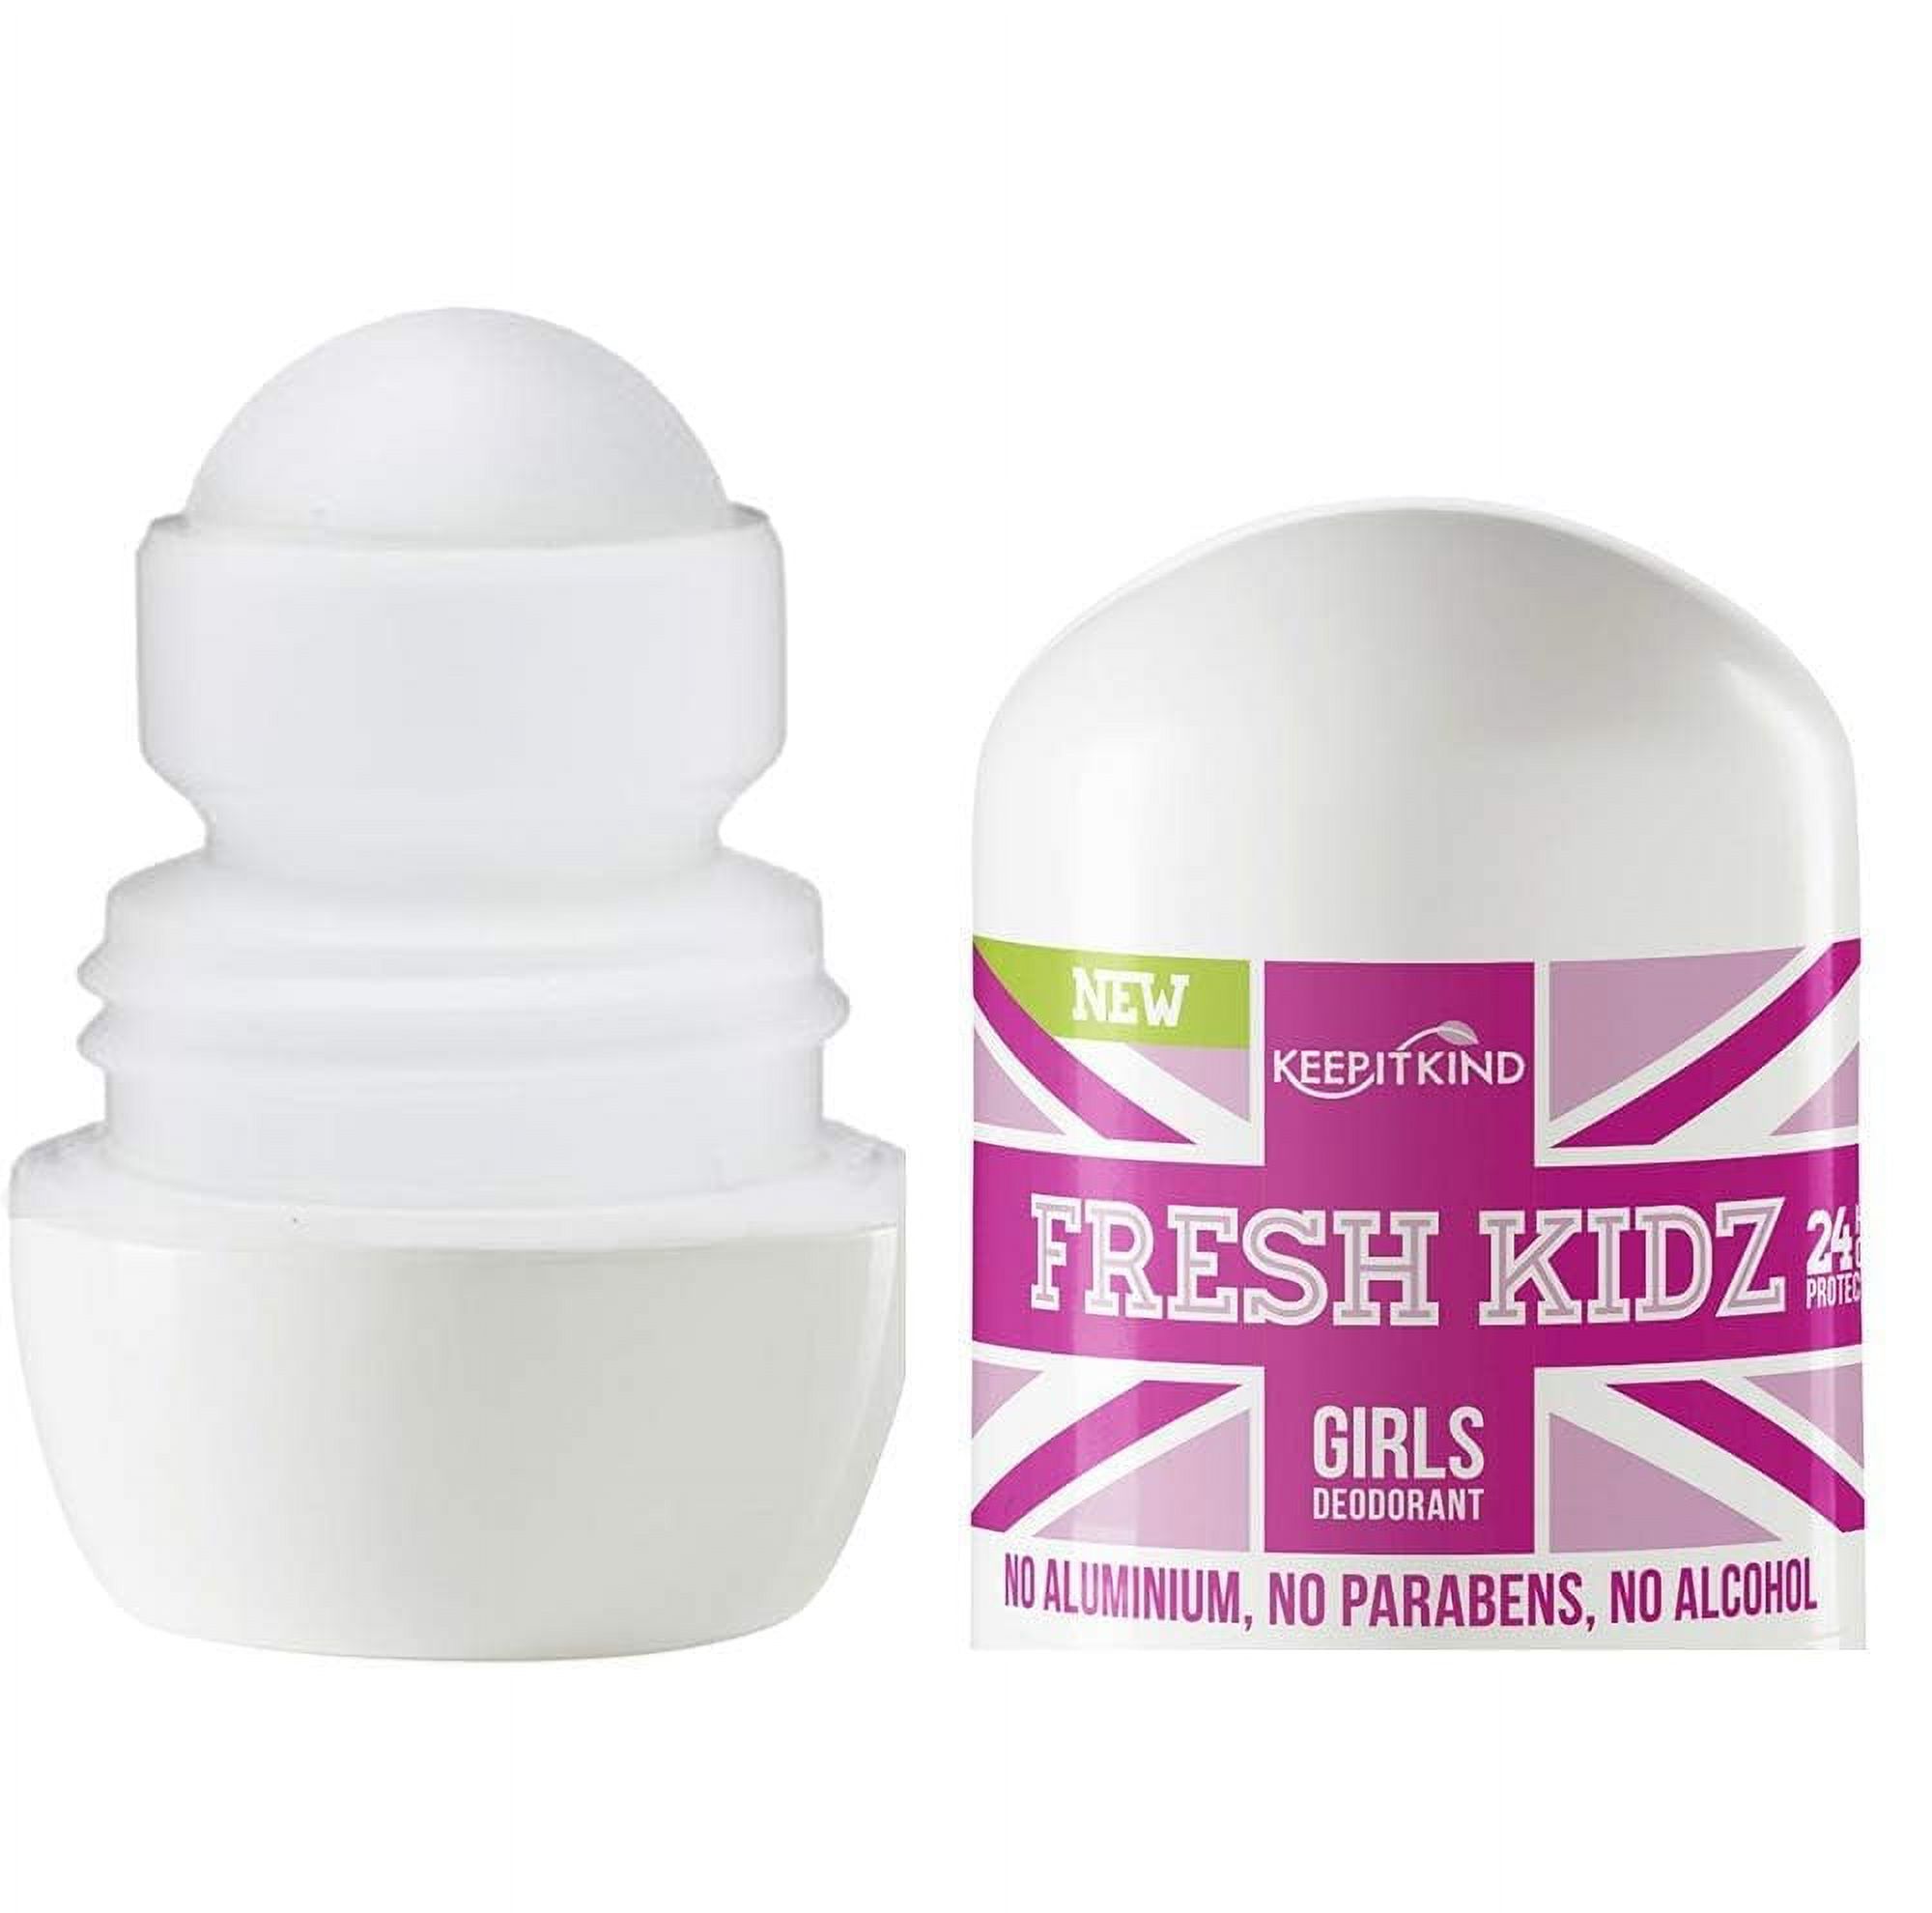 Fresh Kidz Roll On Deodorant for Kids and Teens - Baking Soda and Aluminum-free 24 Hour Protection for Sensitive Skin - Girls "Pink" 1.86 fl. oz. - image 2 of 4